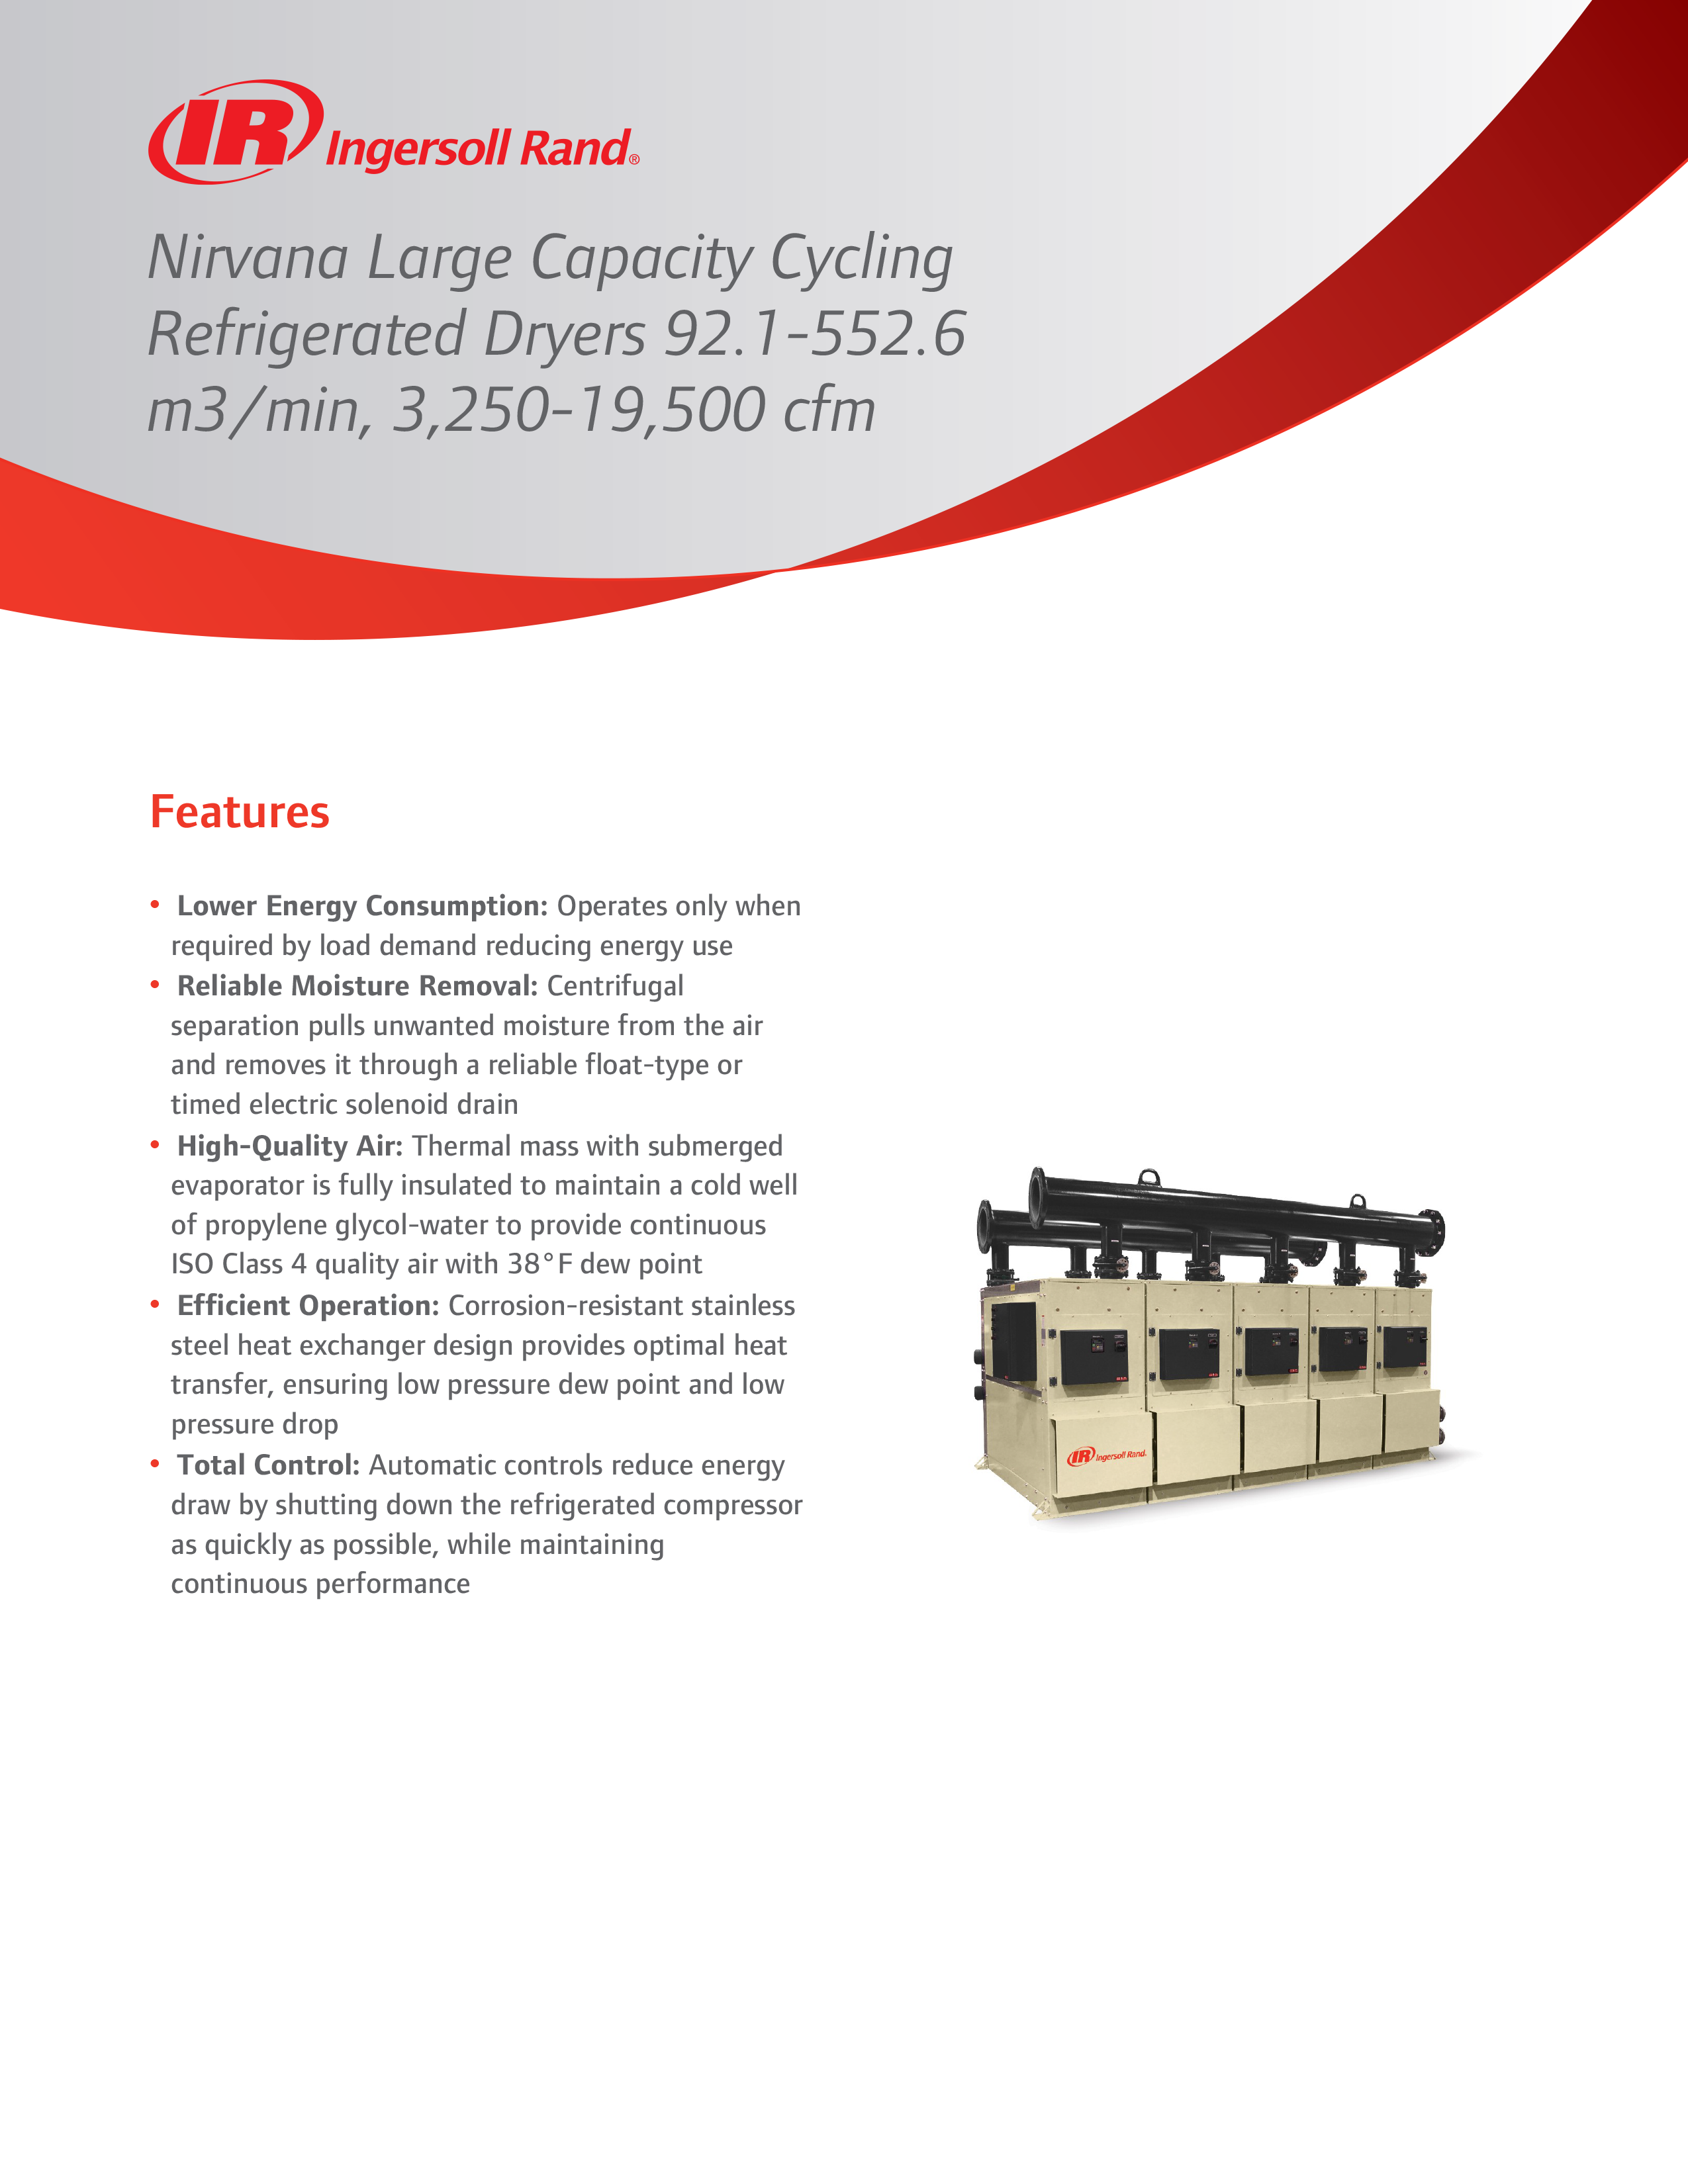 Ingersoll Rand REFRIGERATED DRYERS